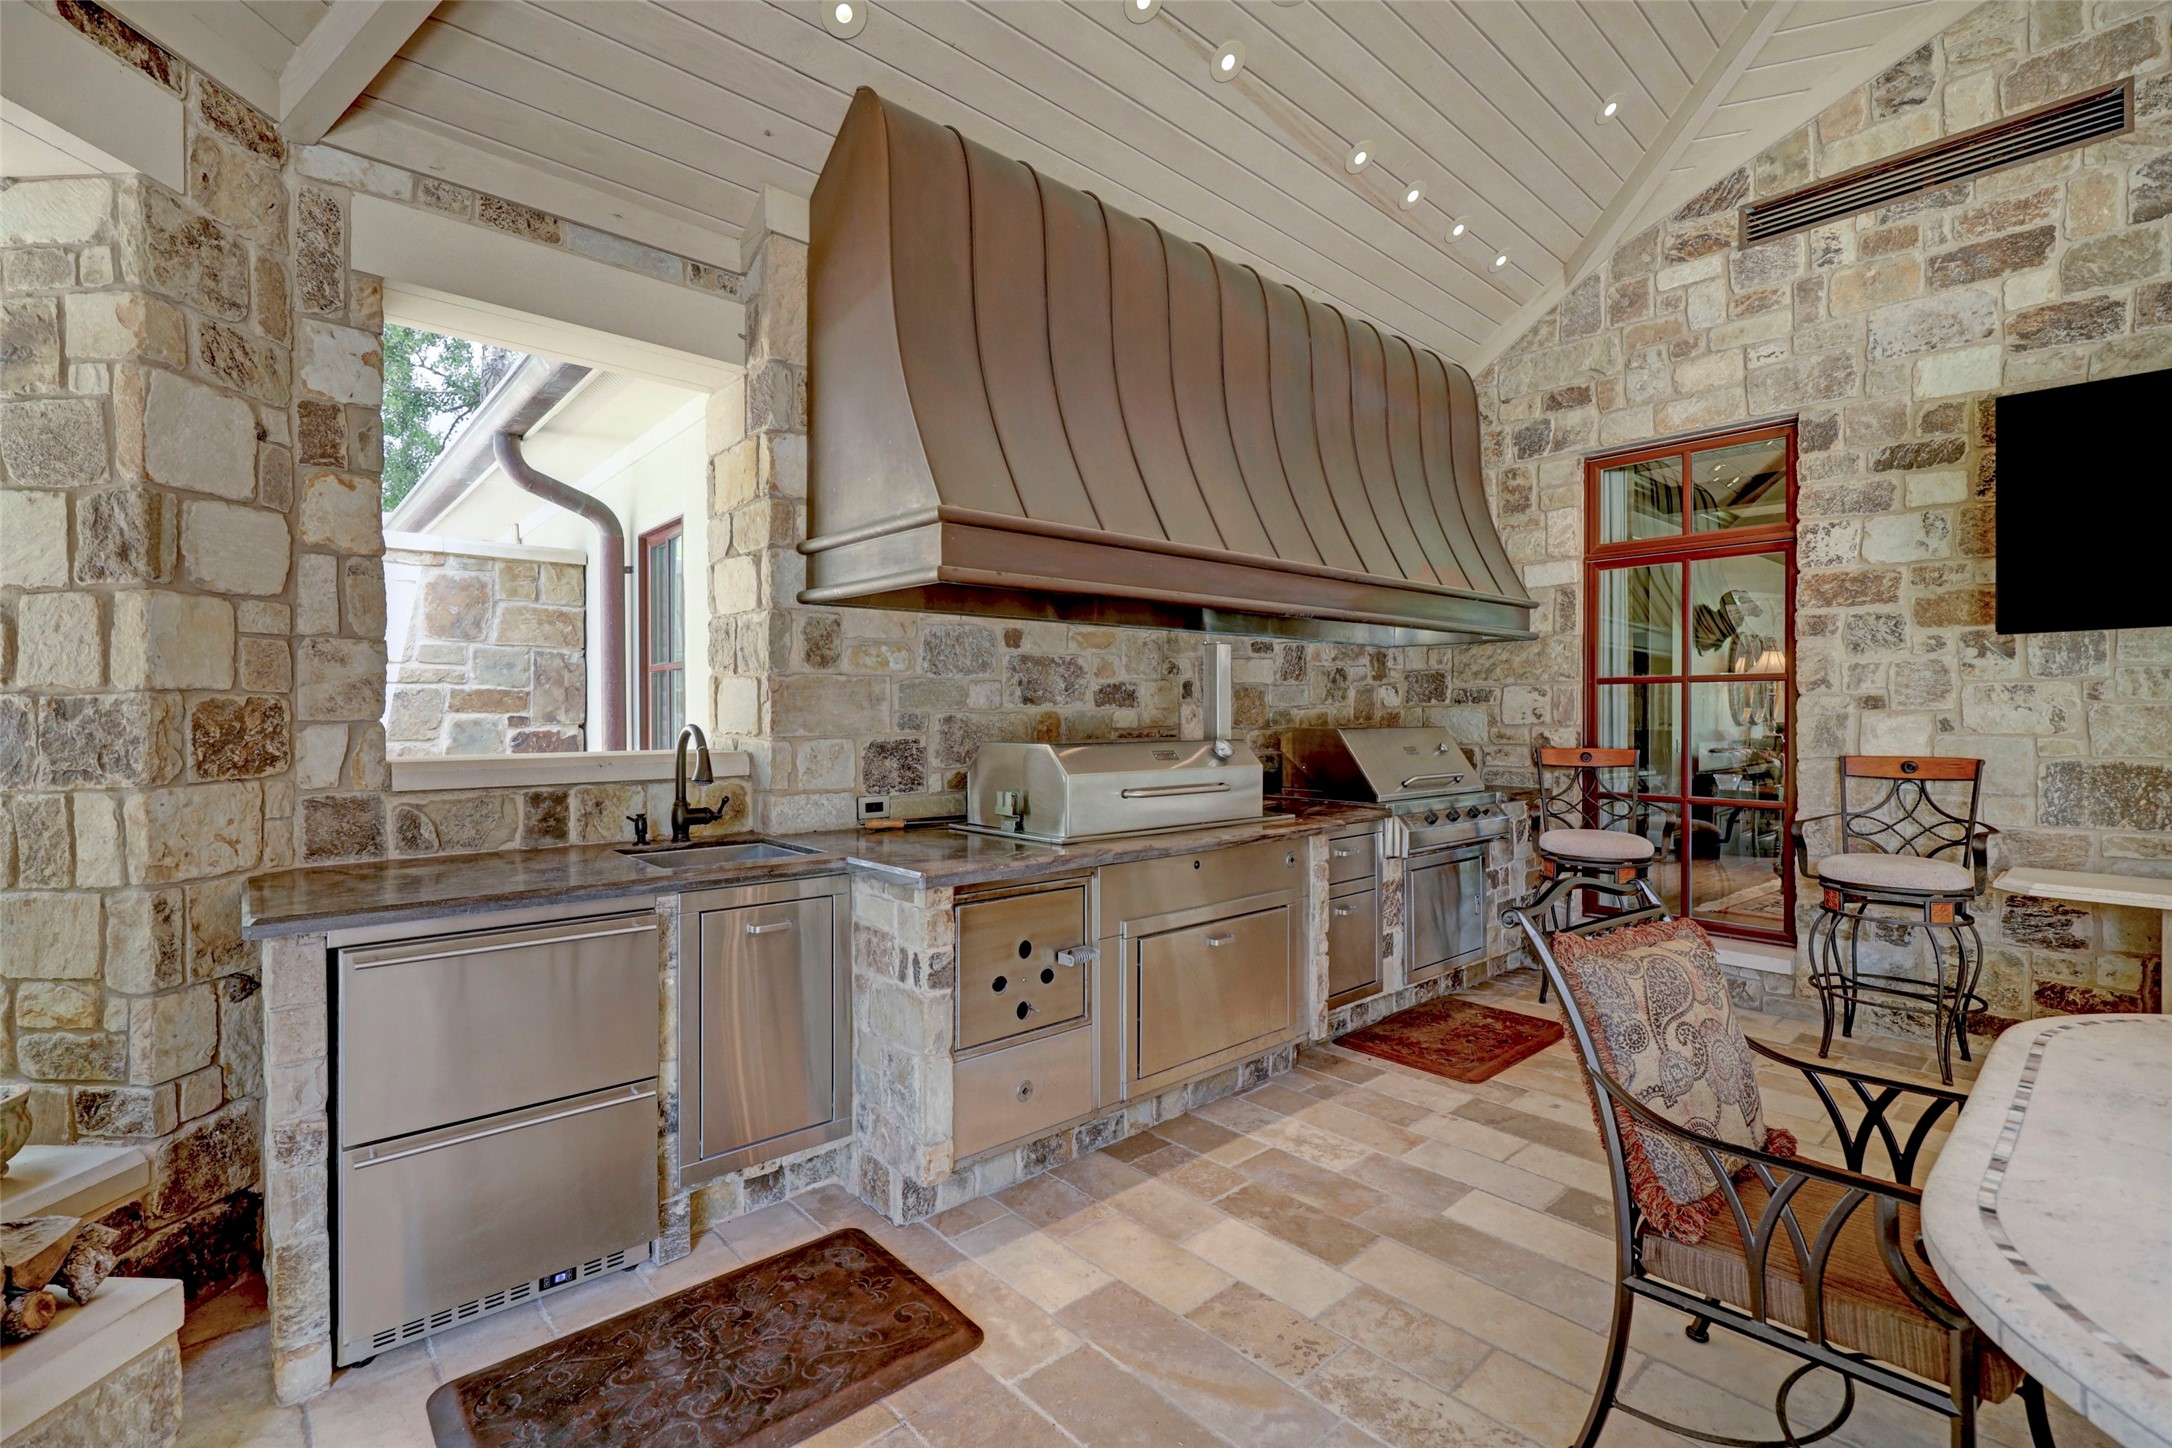 One of a kind outdoor kitchen with everything you need for the weekend.